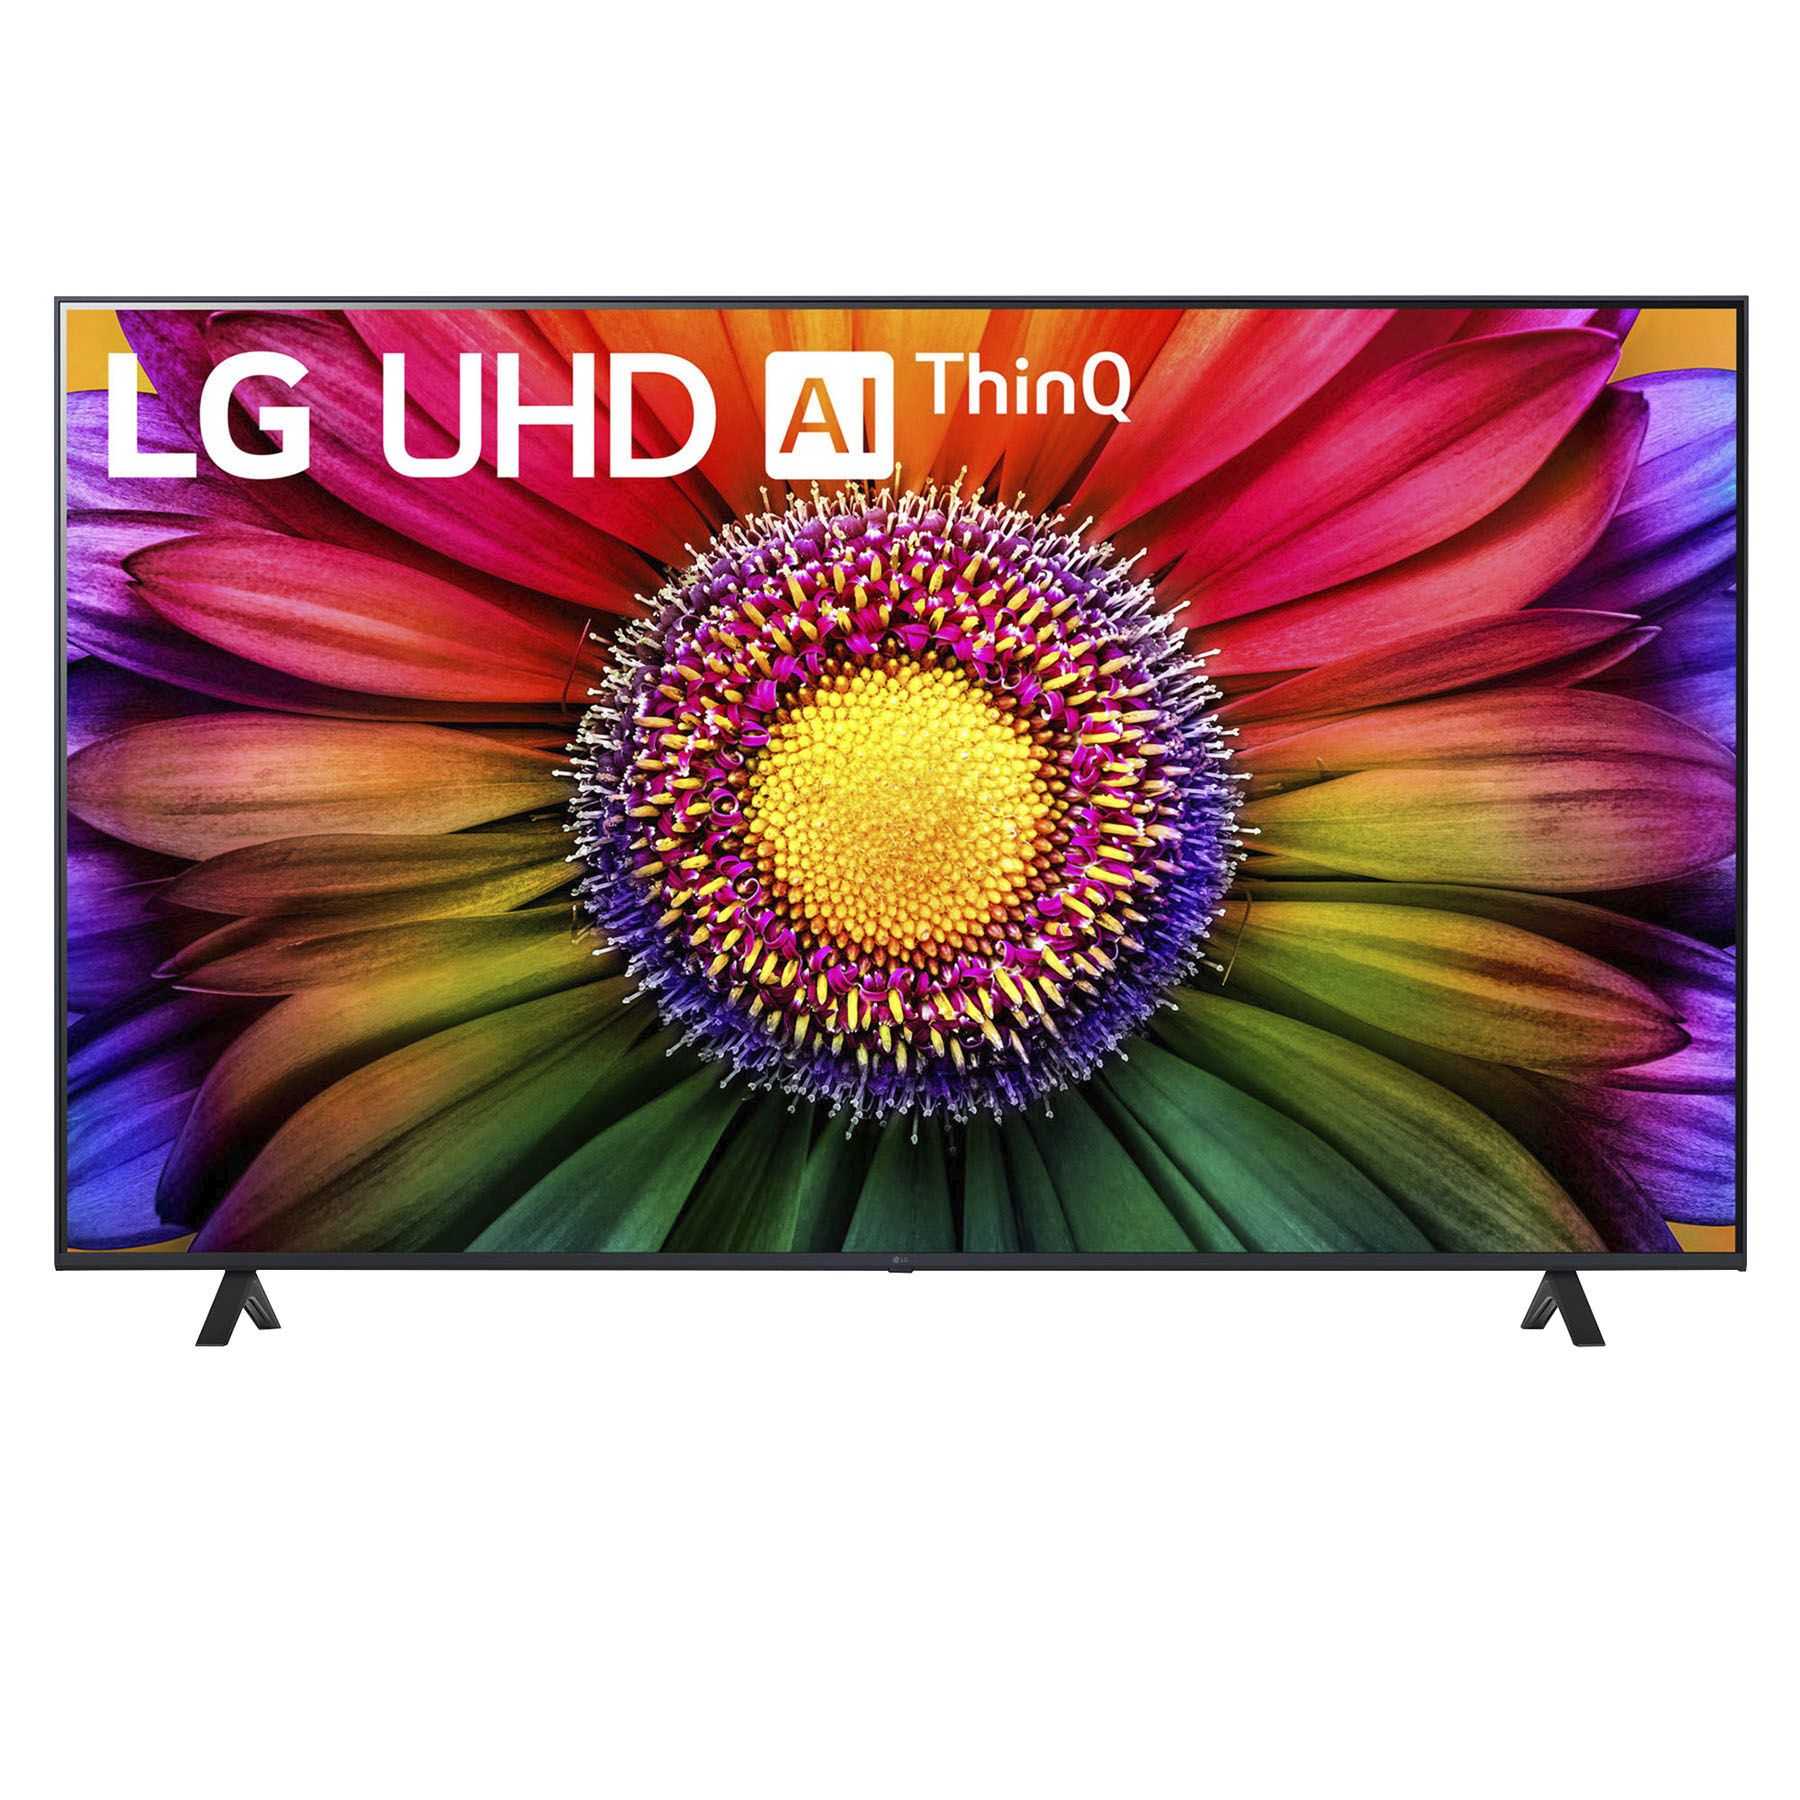 LG 86" UR8000 4K UHD AI ThinQ Smart TV with 4 Year Coverage